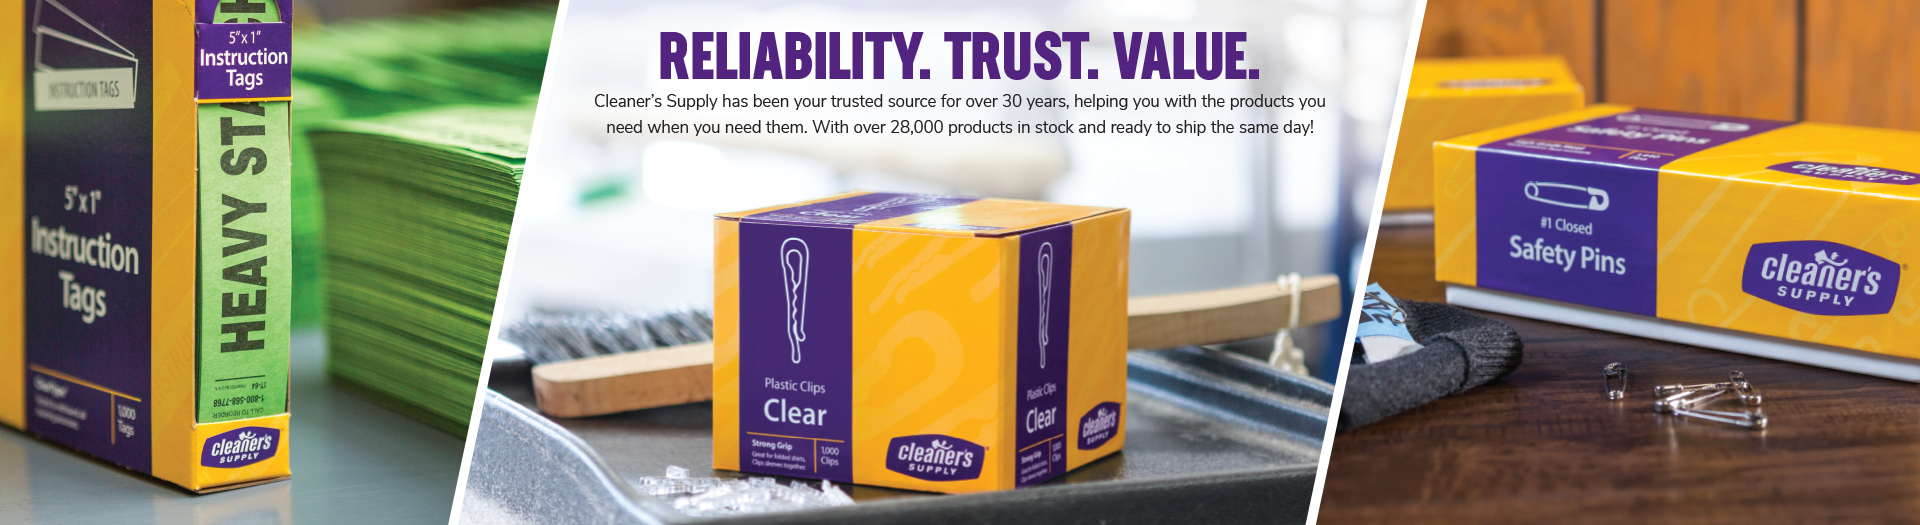 Dry Cleaning Supplies | Tailoring Supplies | Laundry Supplies | Reliability. Trust. Value. Cleaner's Suply has been your trusted source for 30 years on all your dry cleaning and tailoring needs. With over 28,000 products in stock and ready to ship the same day!